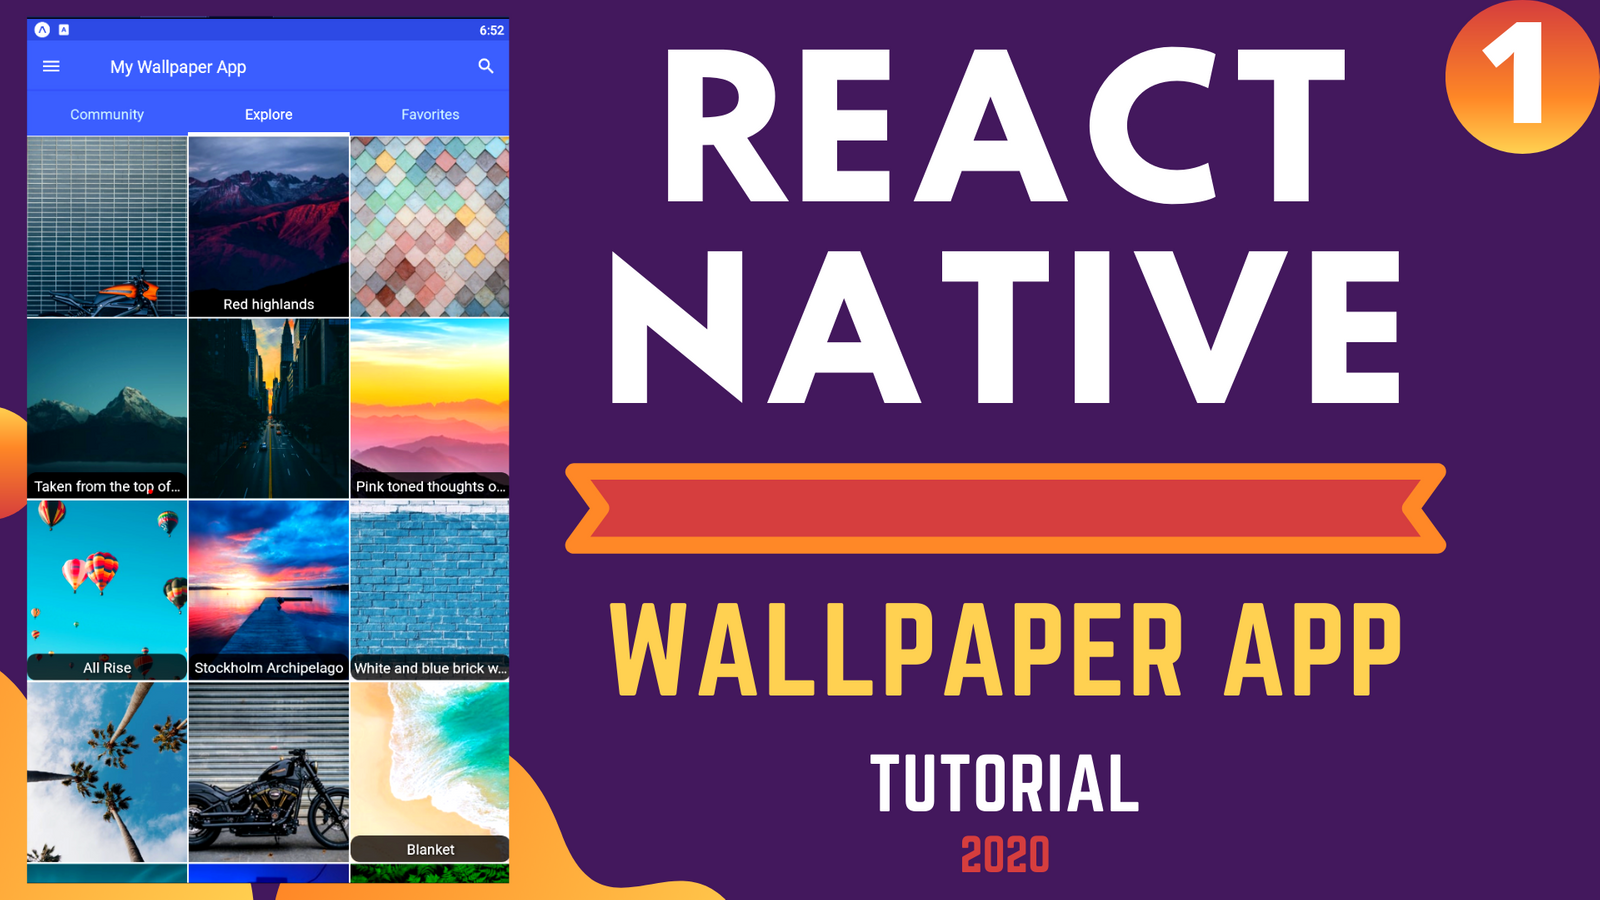 React Native Free Tutorial | How to build a Wallpaper App using React Native! 